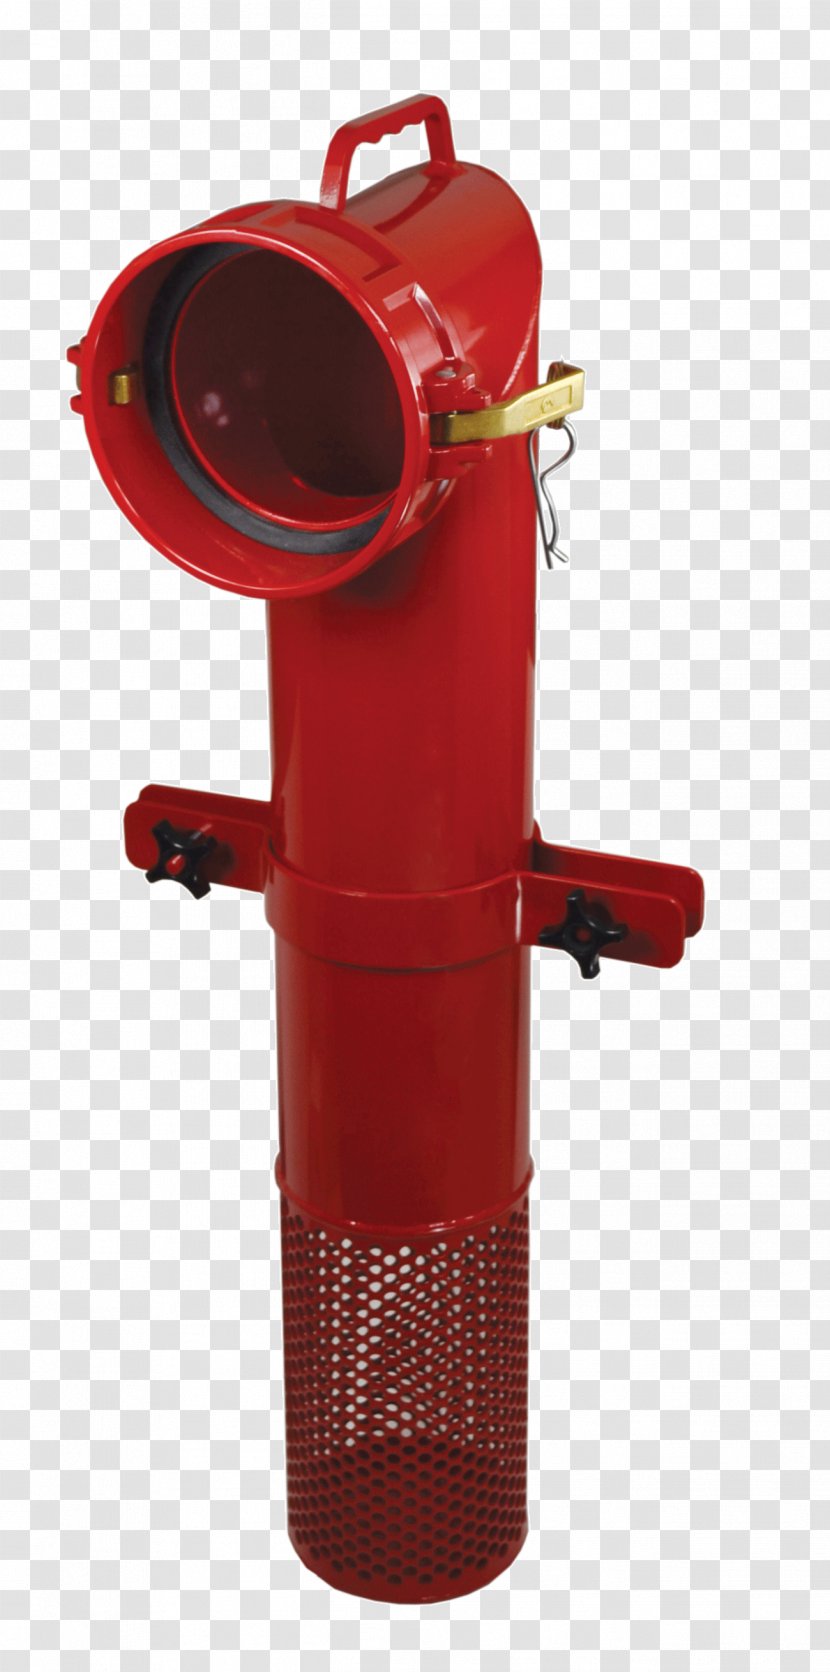 Product Fire Hydrant Manufacturing Conflagration - Firefighting - Whole Barrels Transparent PNG